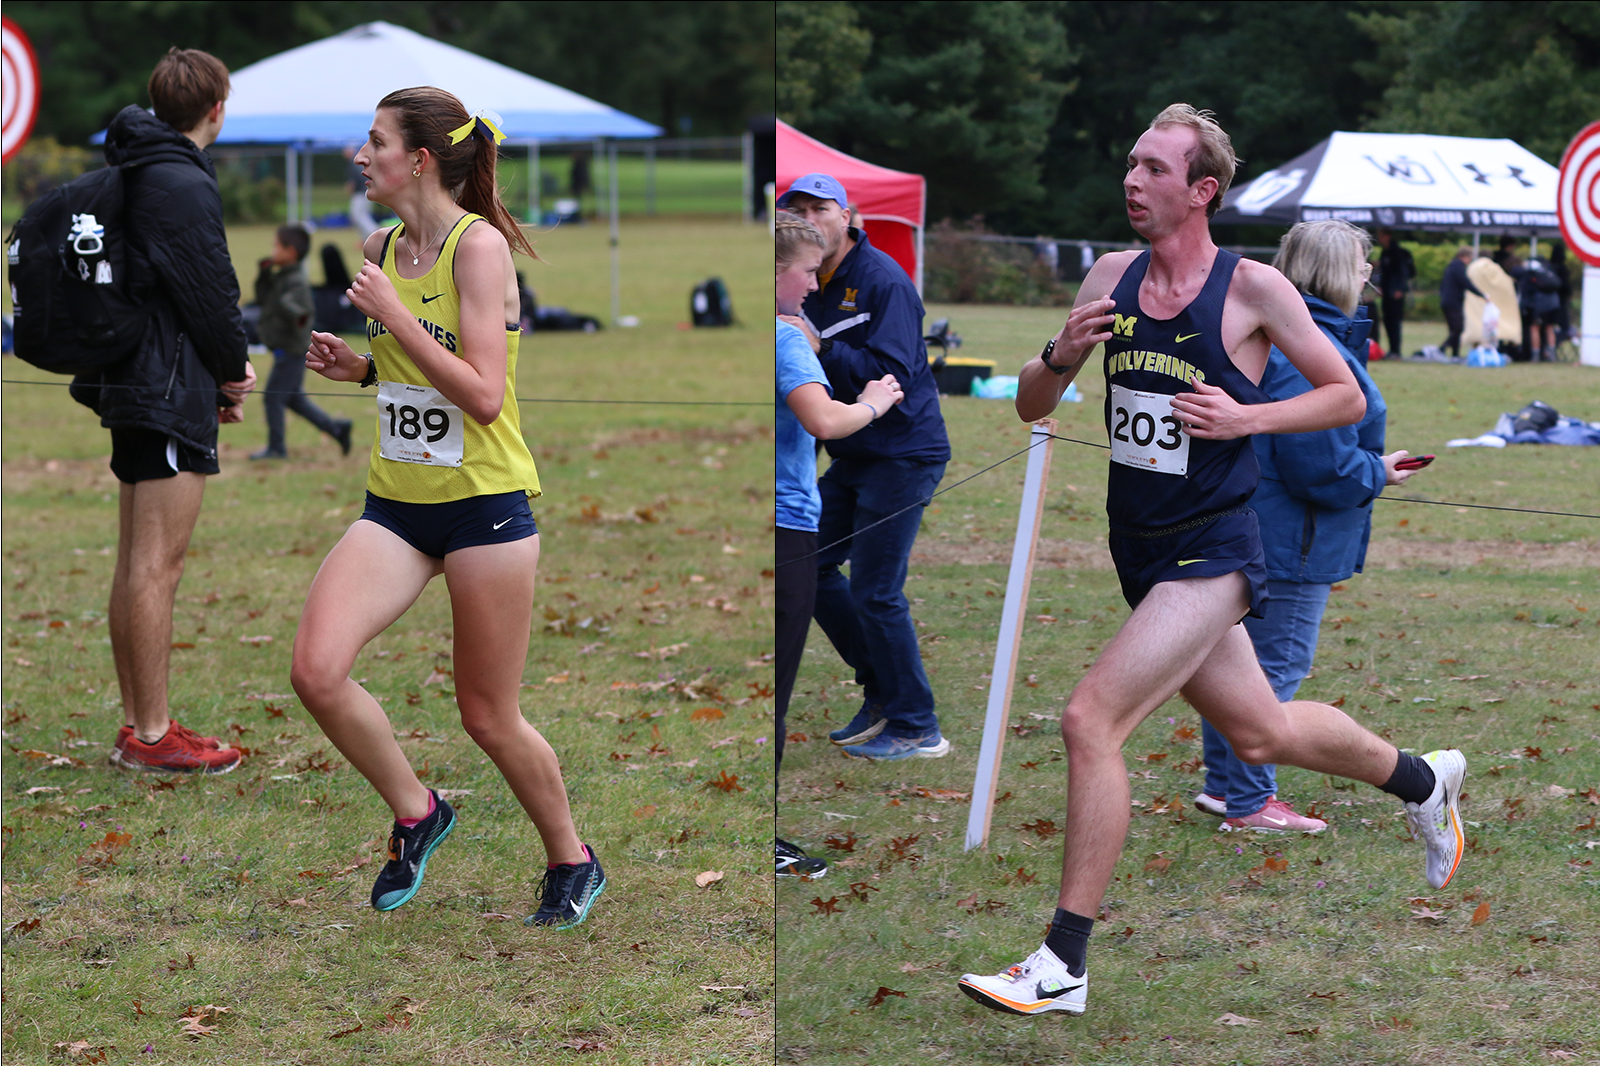 Callison and Seibert Qualify for NAIA National Championships